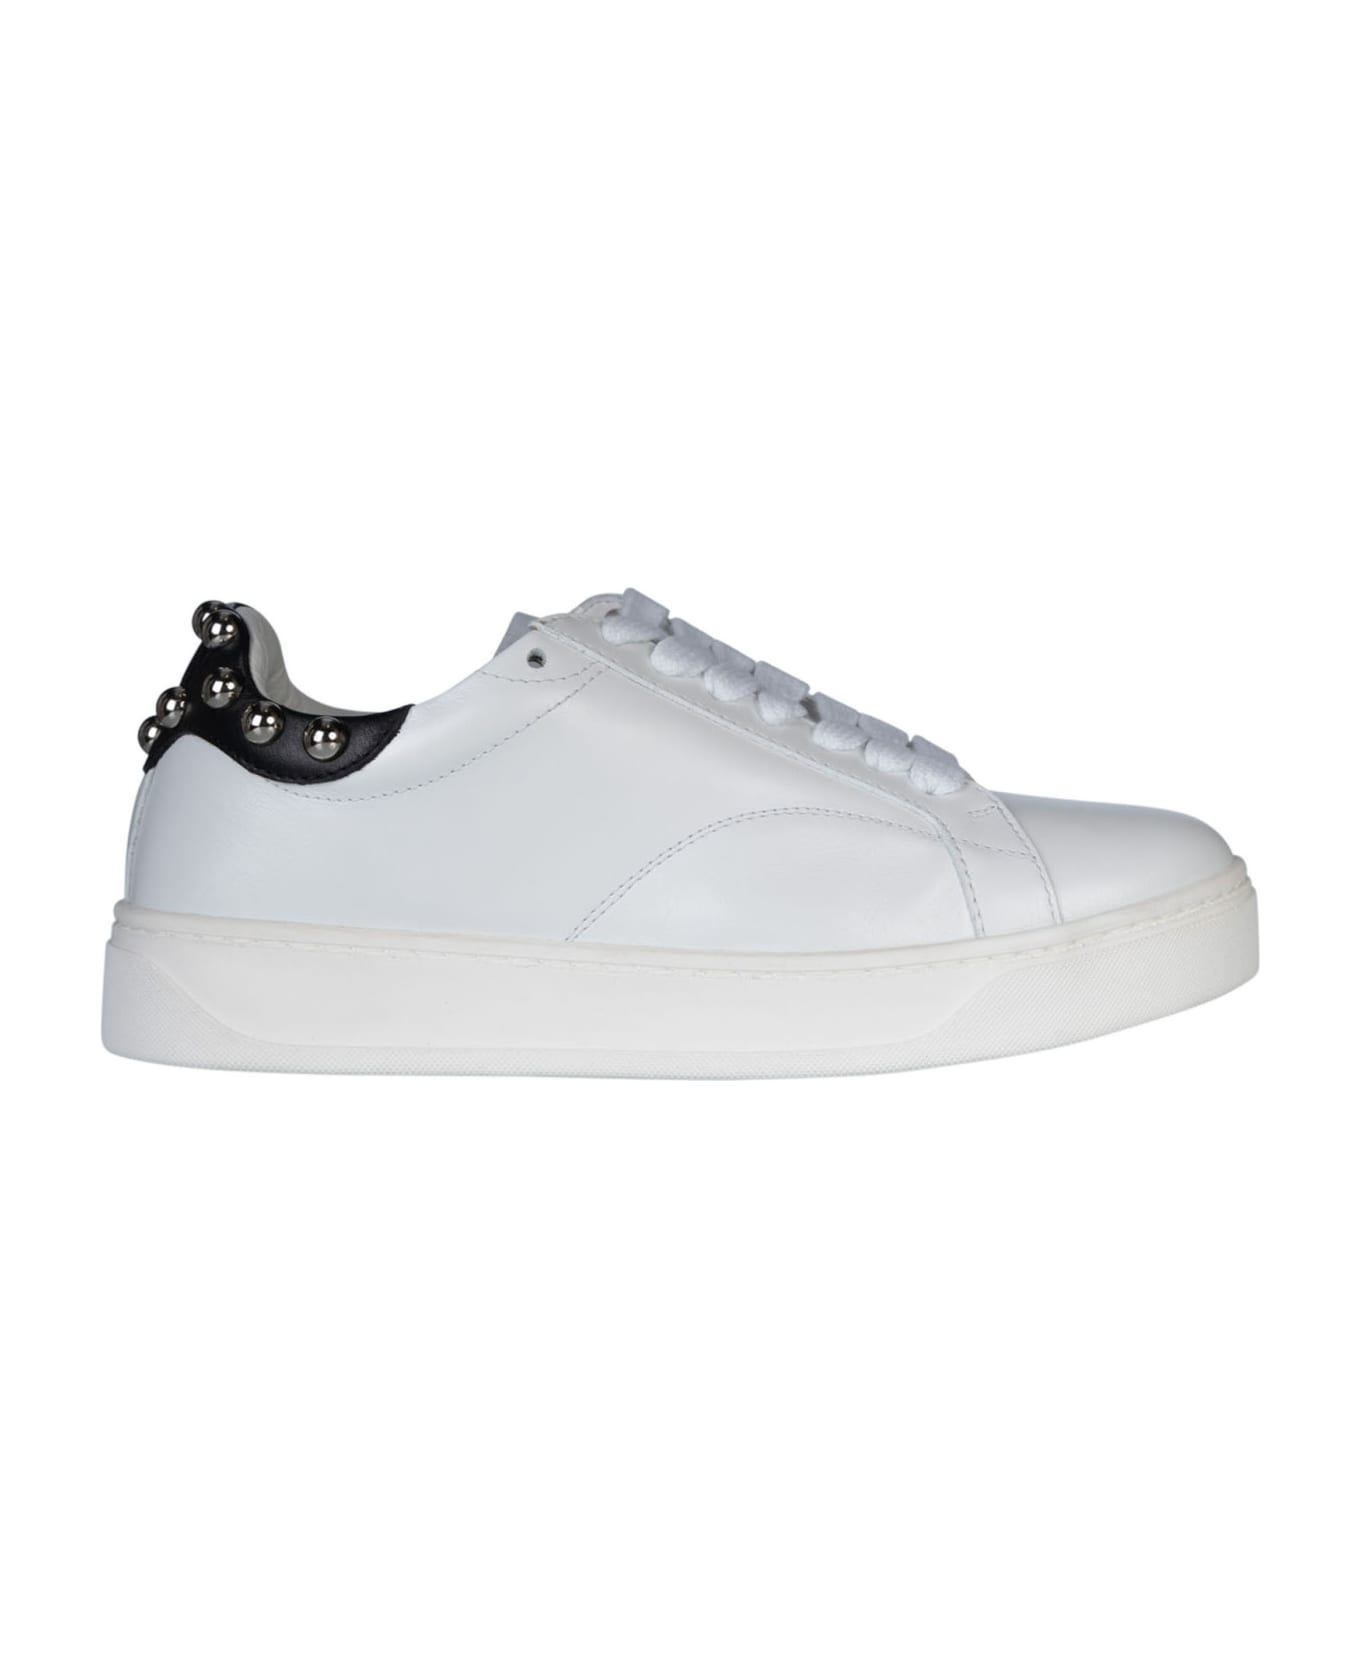 Lanvin Back Studded Sneakers - White/Silver